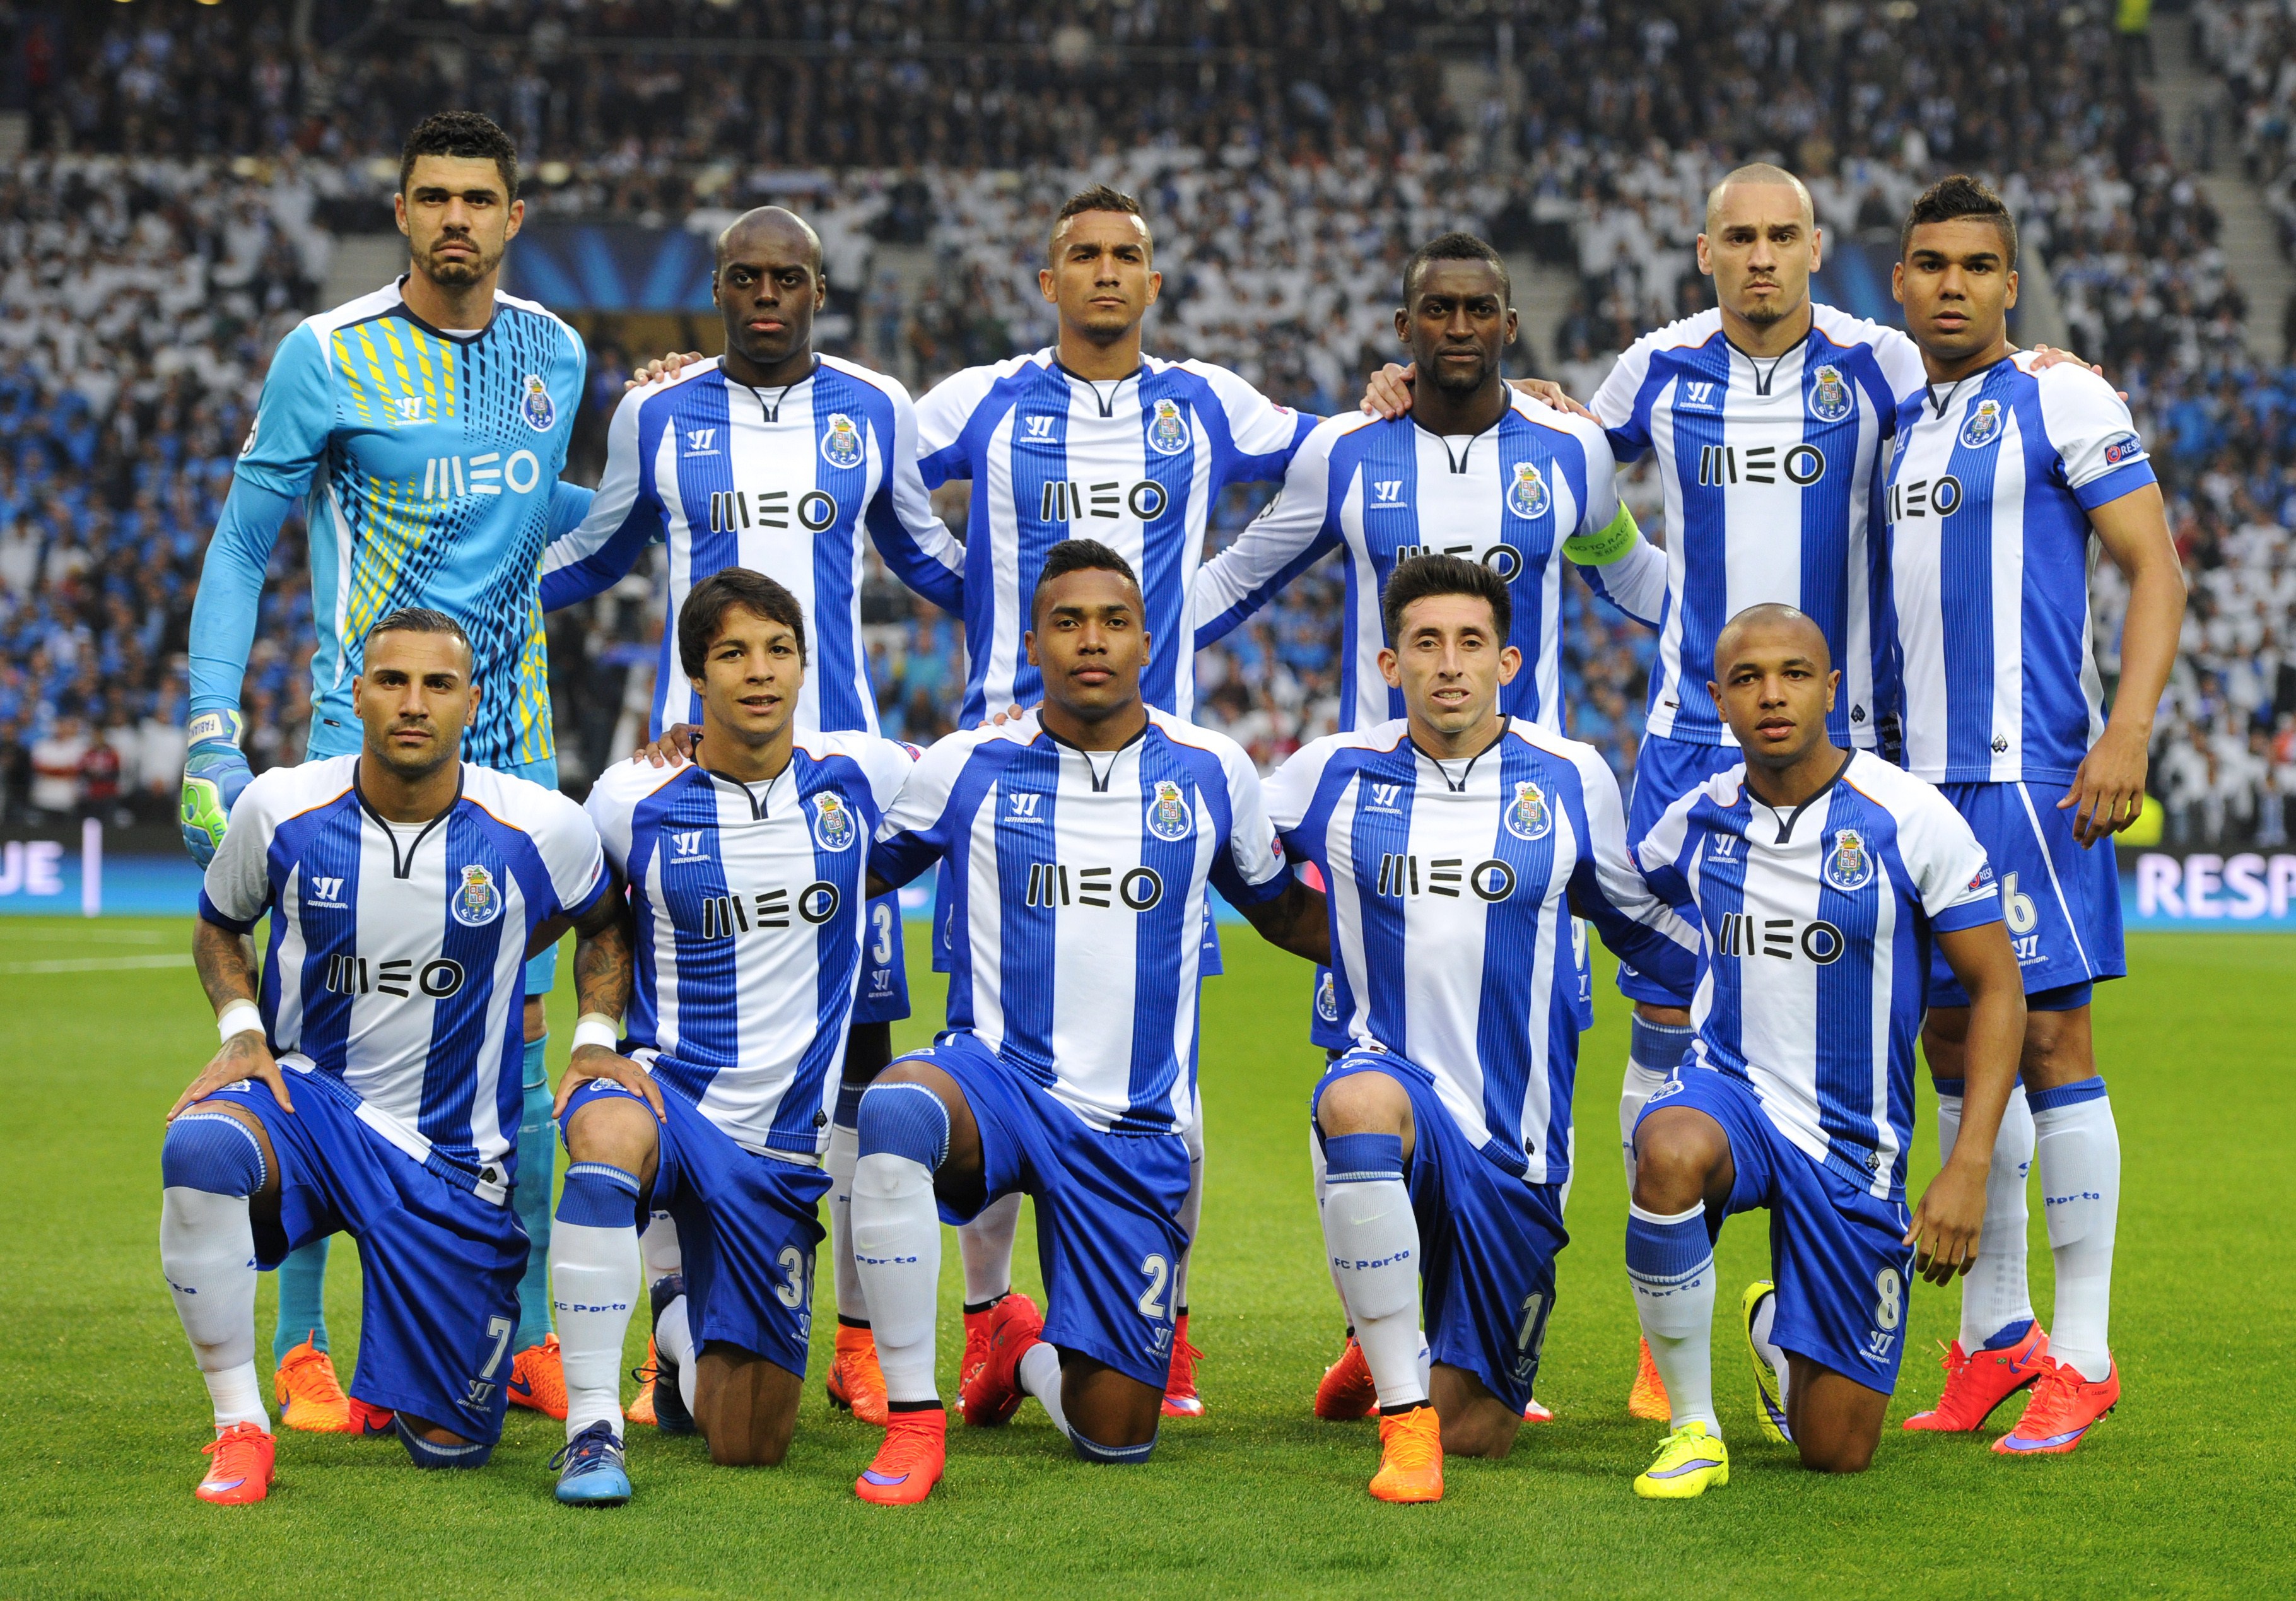 FC Porto team pose before the UEFA Champions League quarter final football match FC Porto vs FC Bayern Munich at the at the Dragao stadium in Porto on April 15, 2015. AFP PHOTO / MIGUEL RIOPA (Photo credit should read MIGUEL RIOPA/AFP/Getty Images)